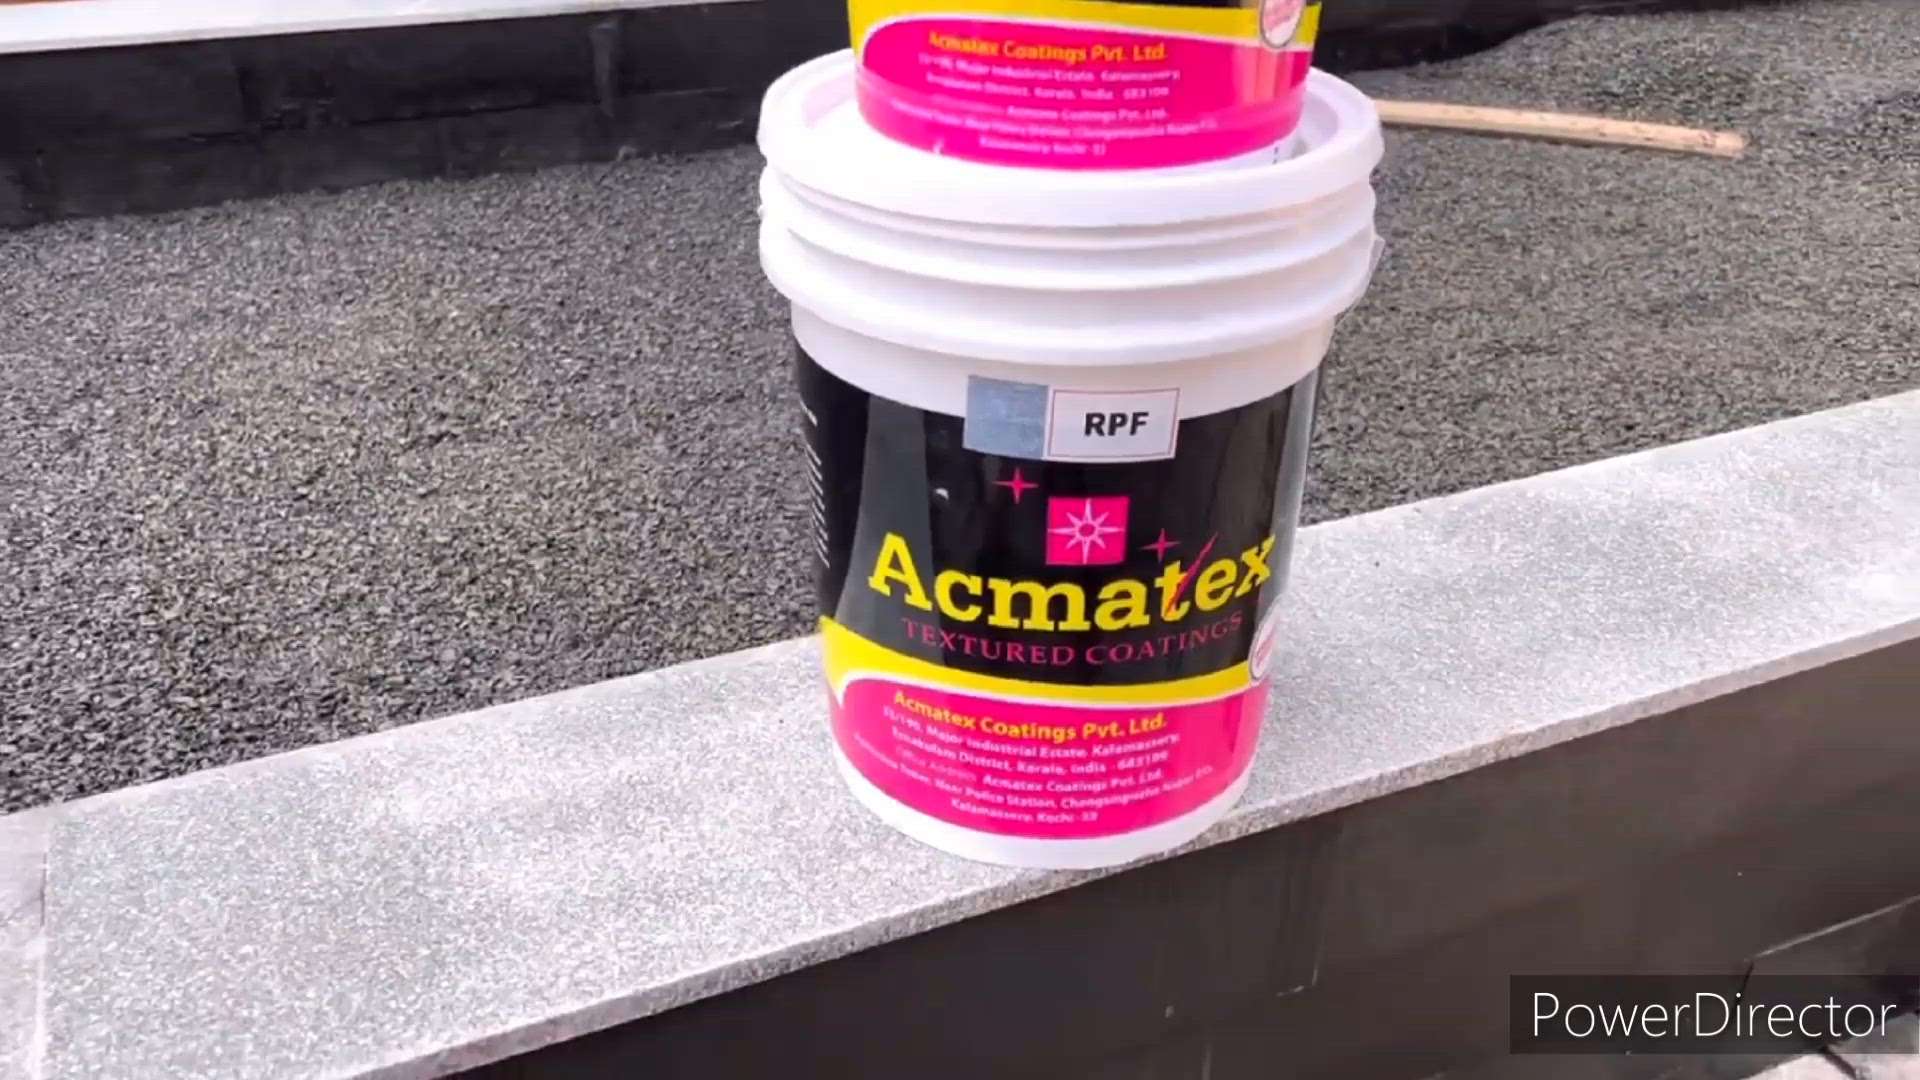 Acmatex RPF for Cement finish
Call 8129533551 for
more details